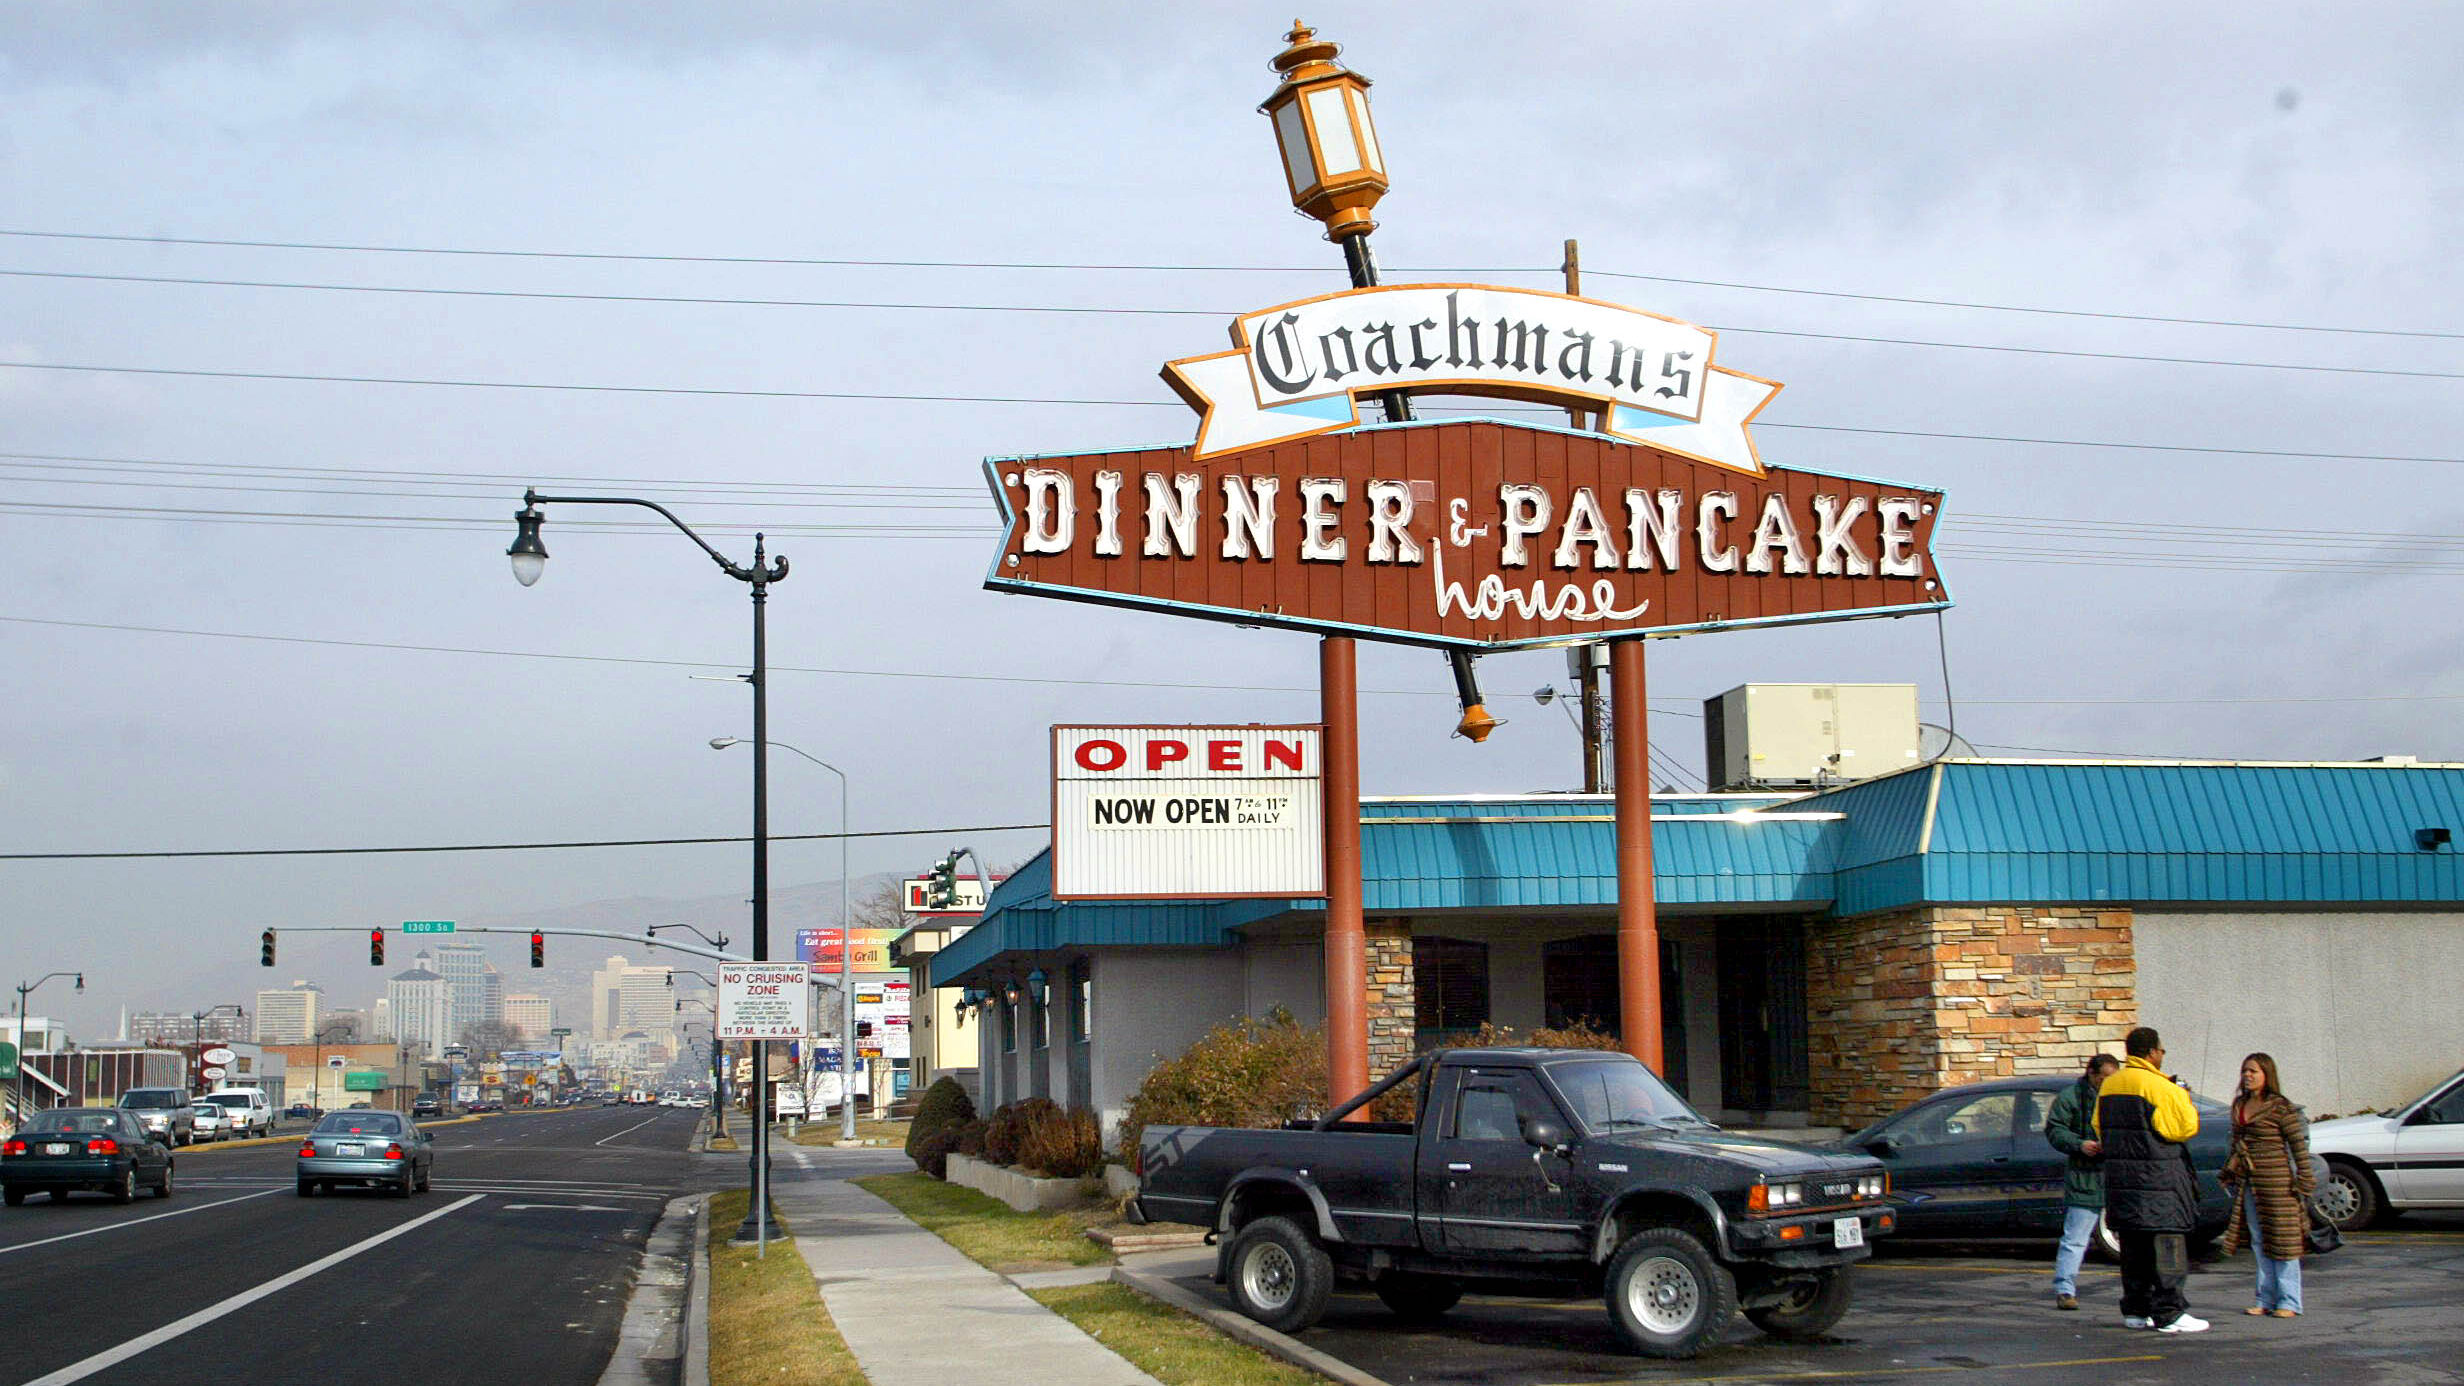 Coachman's Dinner and Pancake House at 1301 South and State Street in Salt Lake City, Utah Dec. 11,...